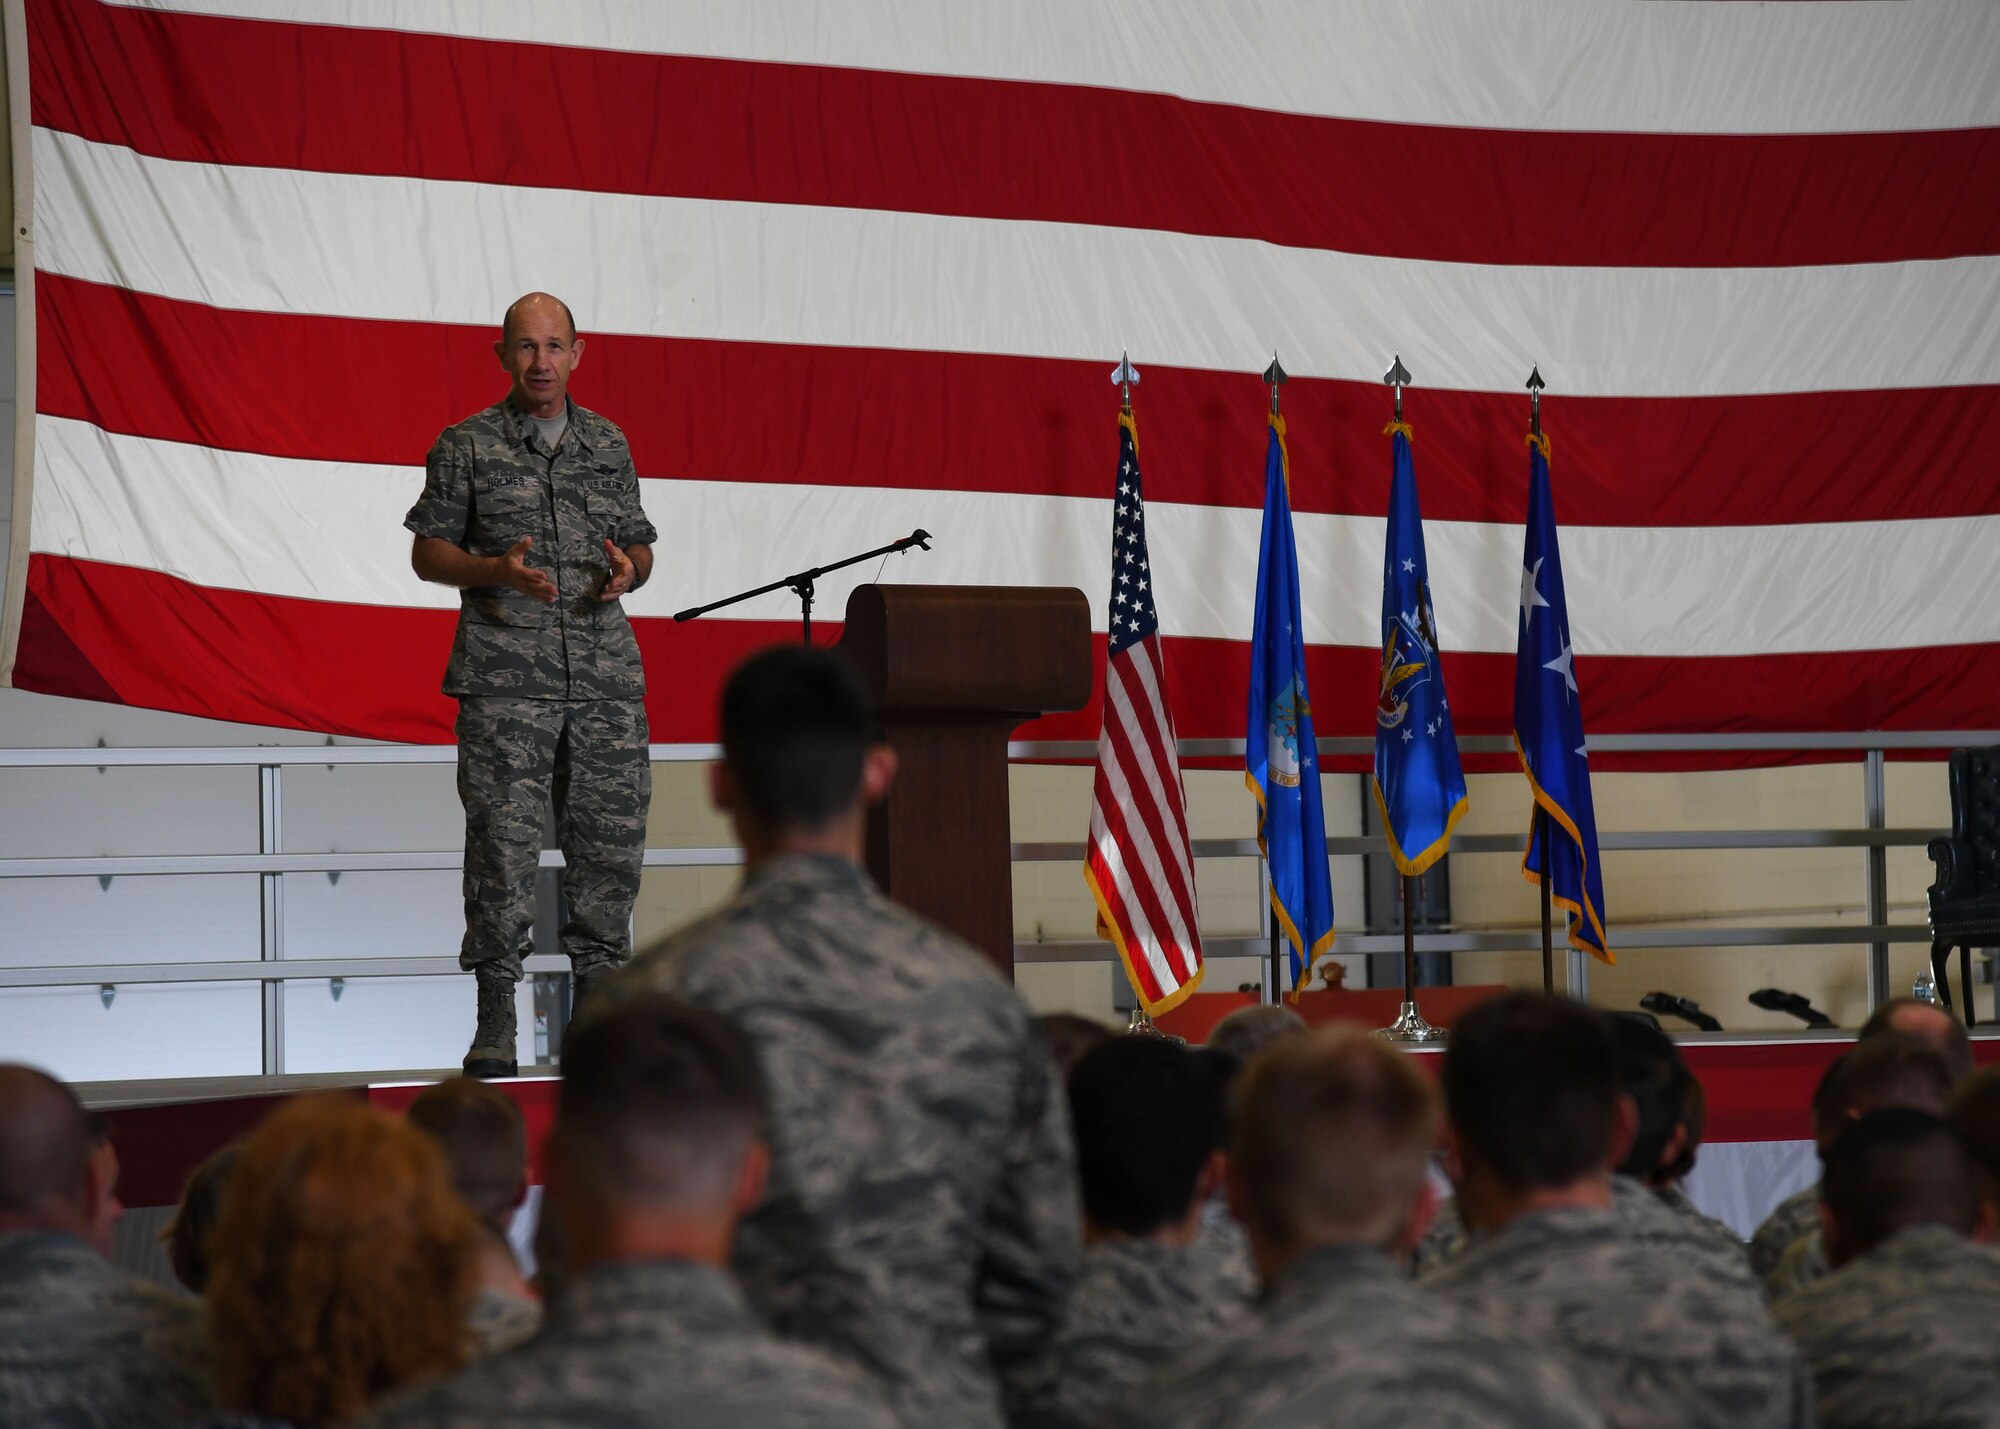 Gen. Mike Holmes, Air Combat commander, responds to a question asked by an officer in the audience during an all-call at Grand Forks Air Force Base, N.D., June 15, 2017. Holmes opened up the floor during the all-call, allowing Airmen to ask questions about the recent transition of the 319th Air Base wing from Air Mobility Command, to Air Combat Command. (U.S. Air Force photo by Airman 1st Class Elora McCutcheon)